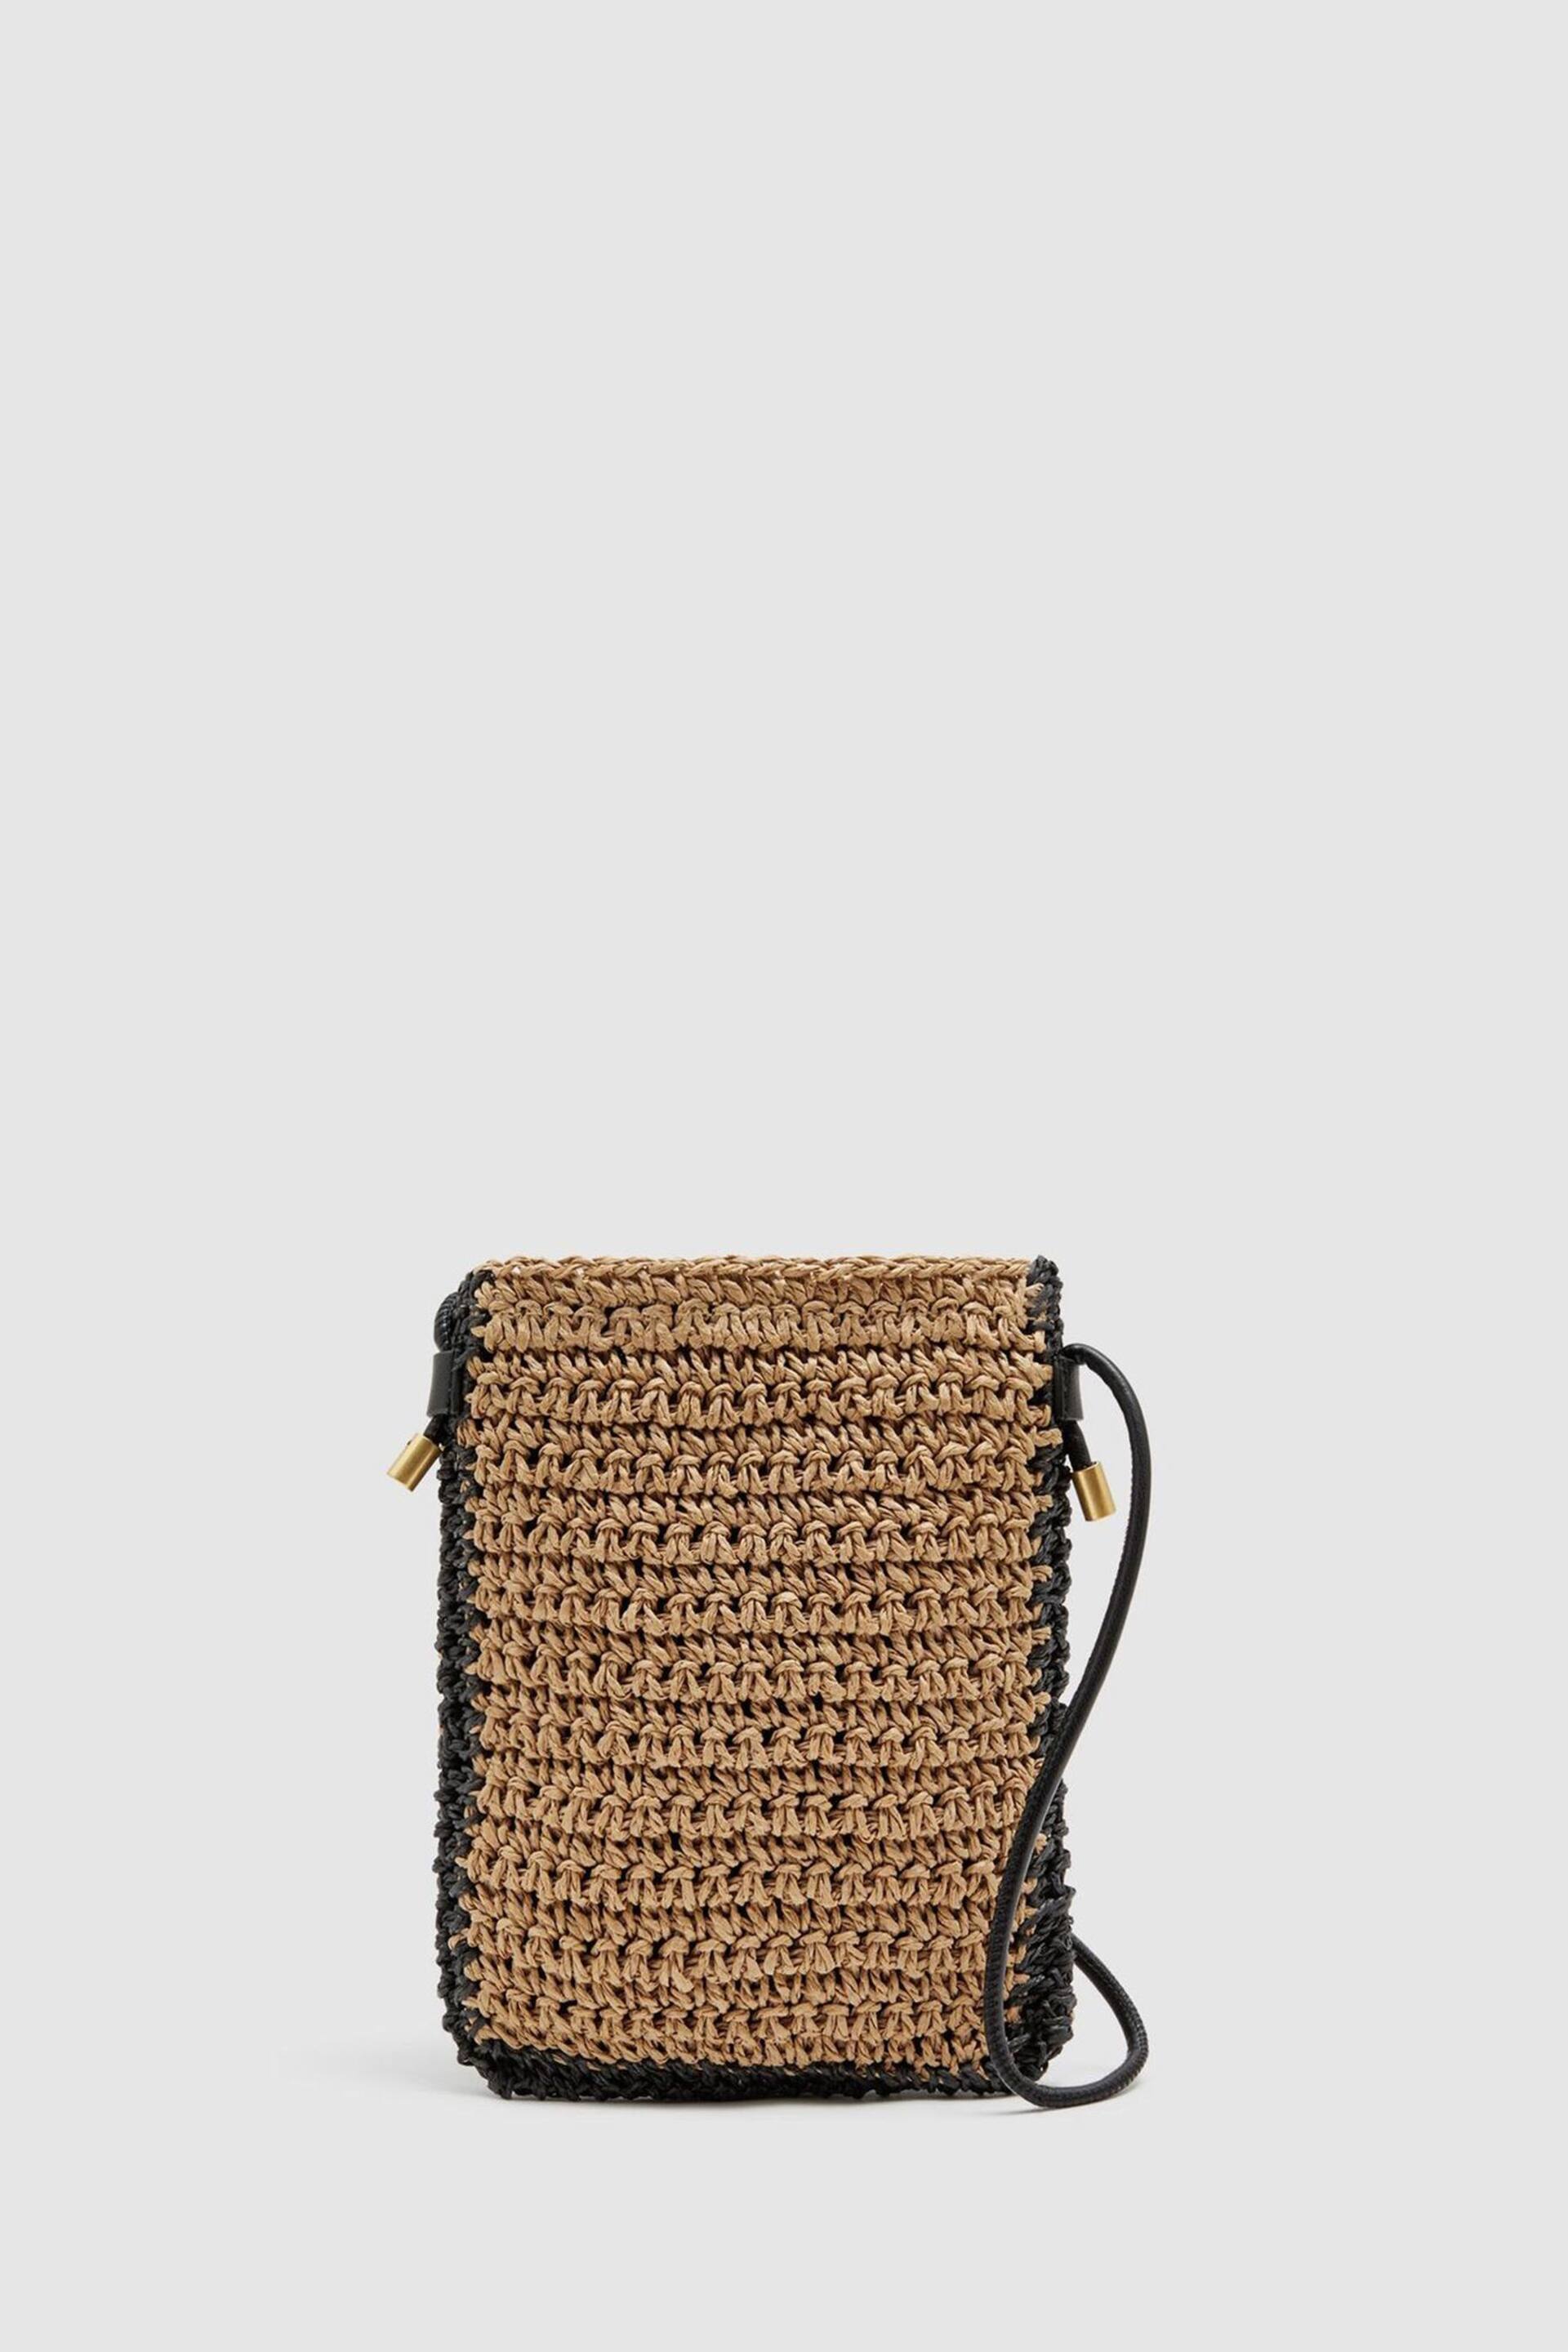 Reiss Natural Taylor Woven Cross-Body Phone Bag - Image 1 of 5